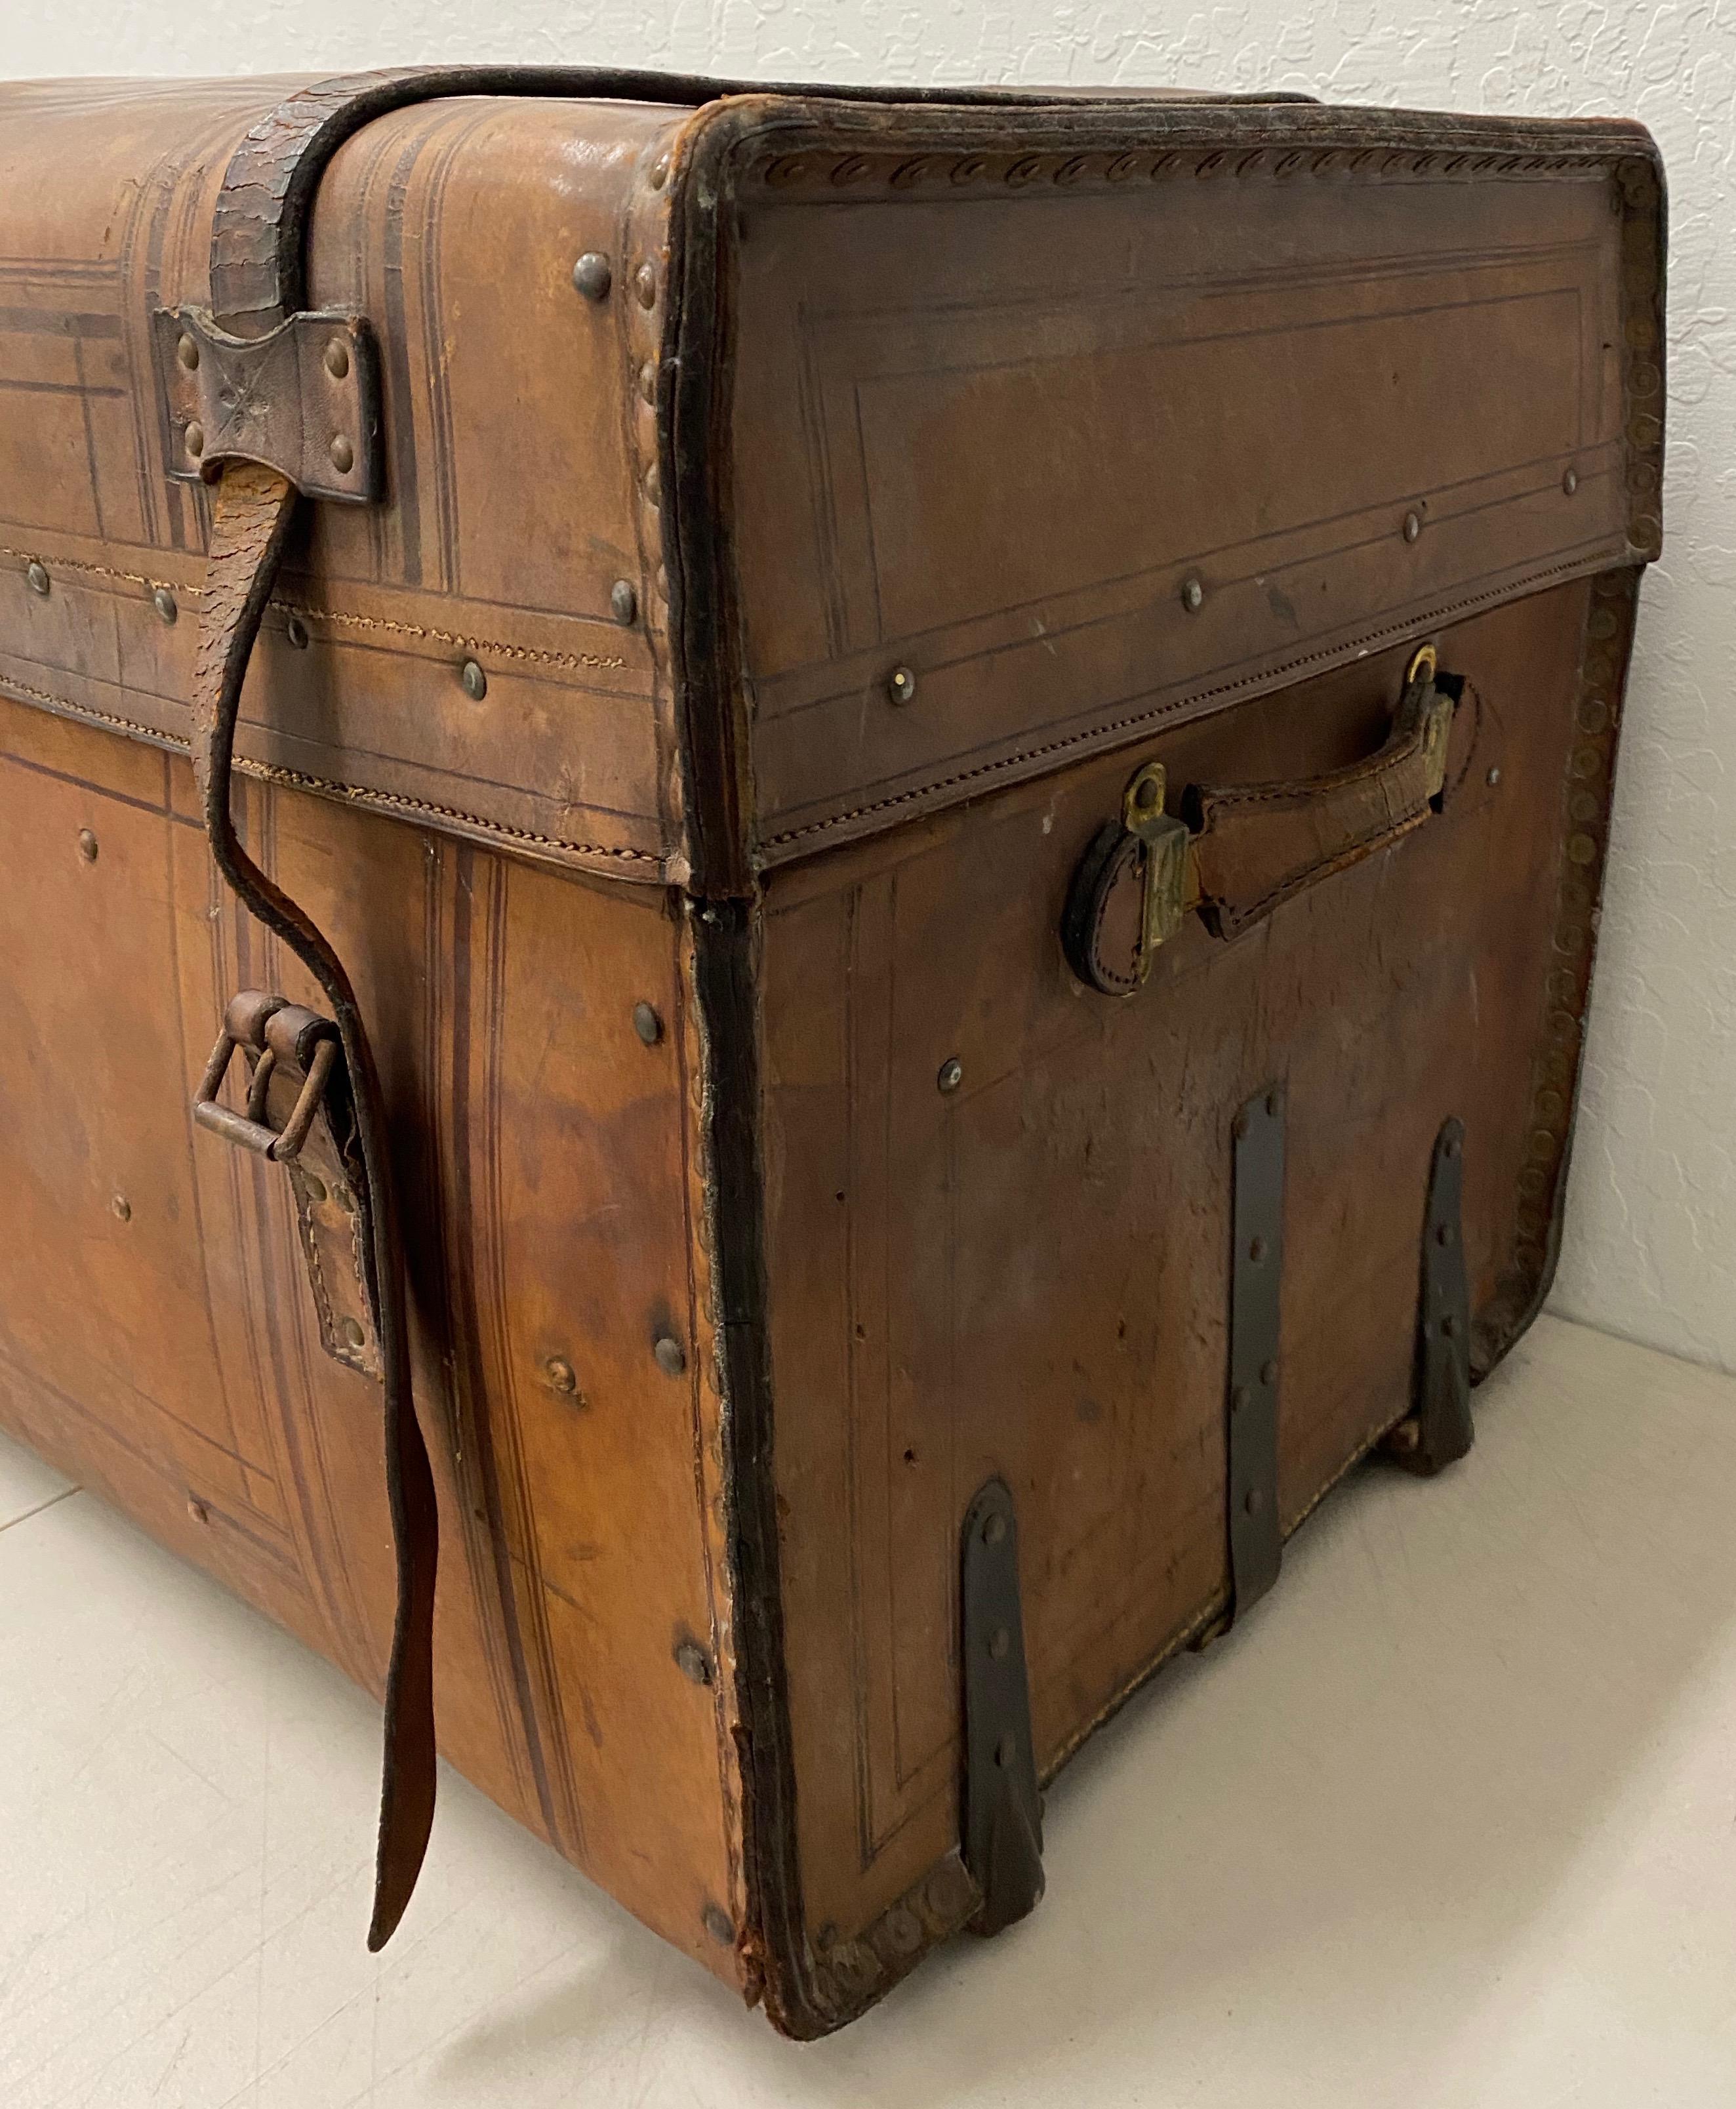 Hand-Crafted 19th Century Leather and Brass Tack Steamer Trunk, circa 1880s